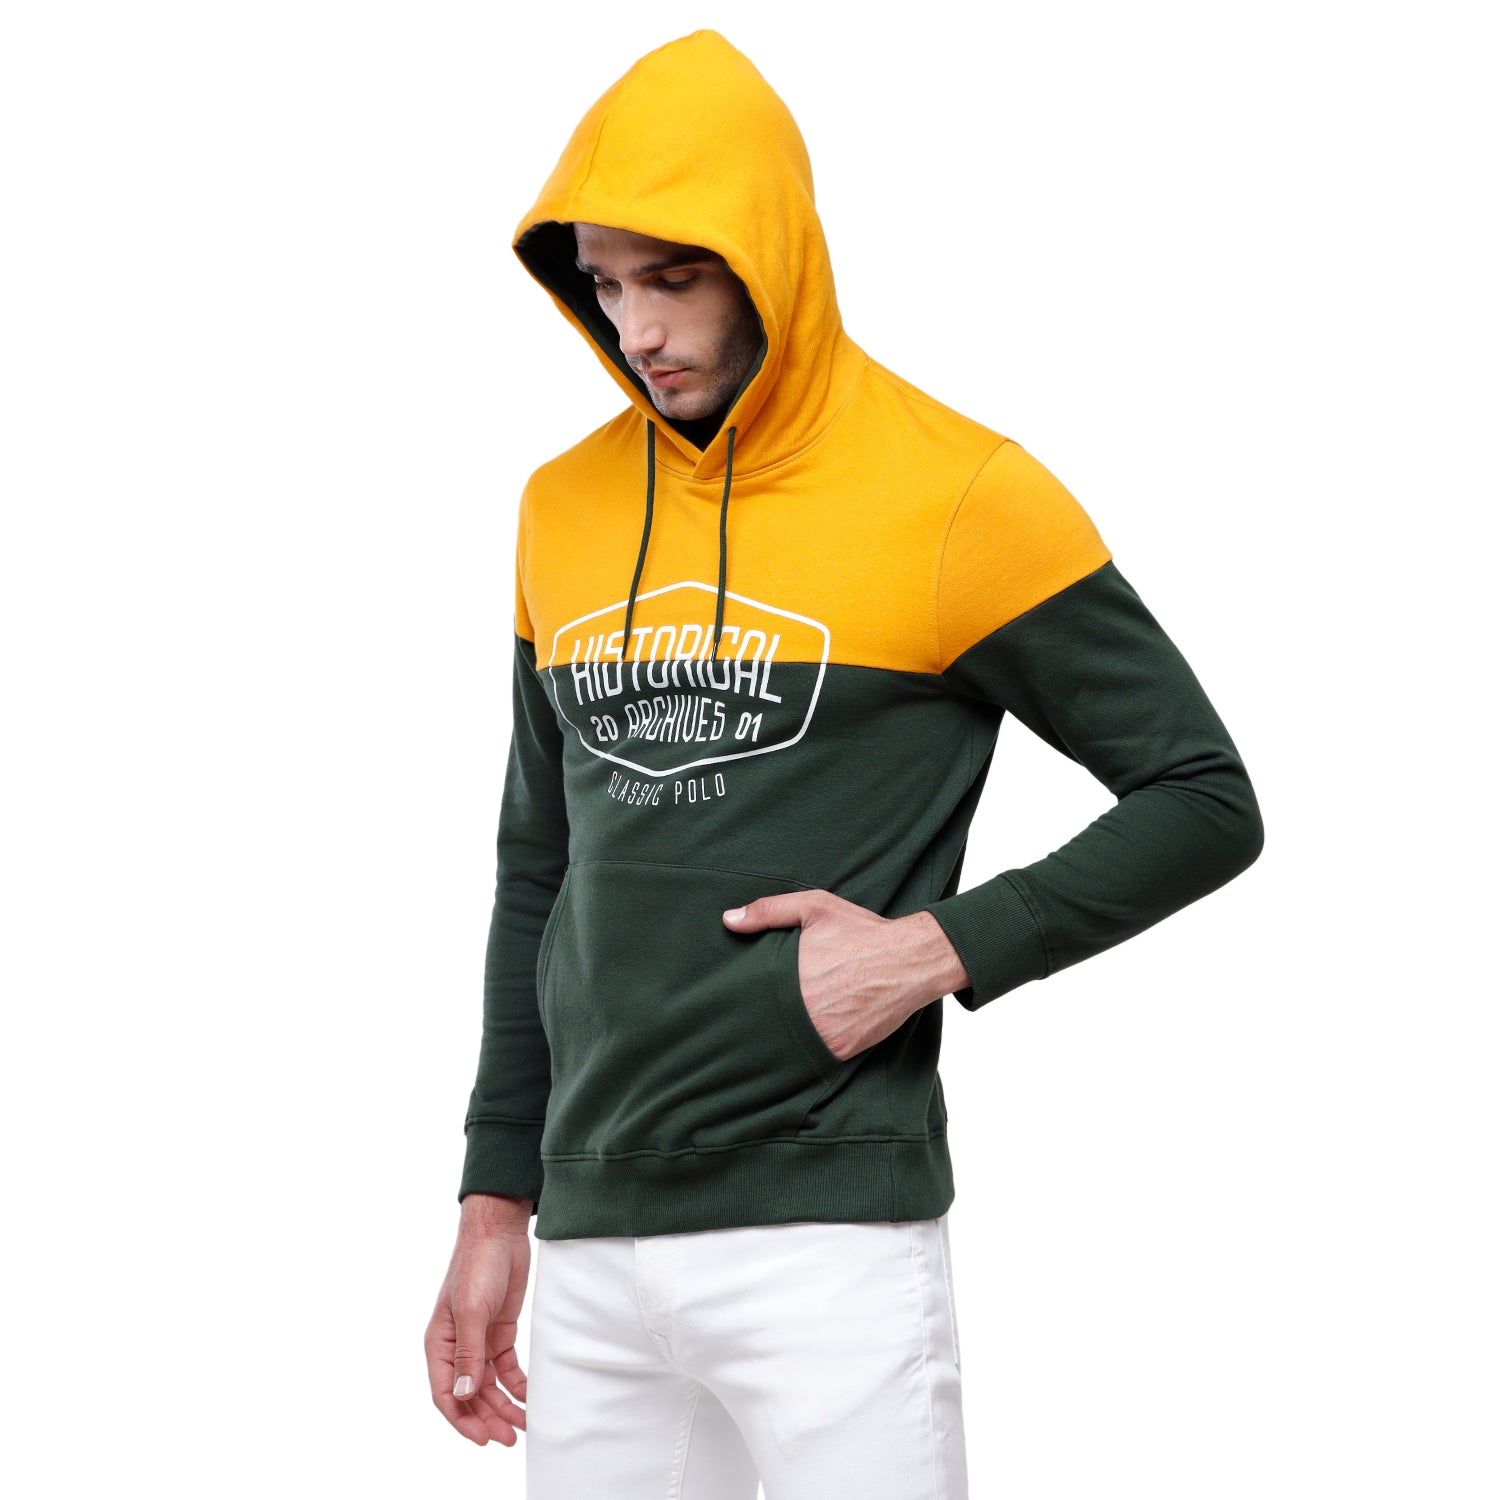 Classic Polo Men's Color Block Full Sleeve Yellow & Green Hooded Sweat Shirt - CPSS-335 A Sweat Shirts Classic Polo 